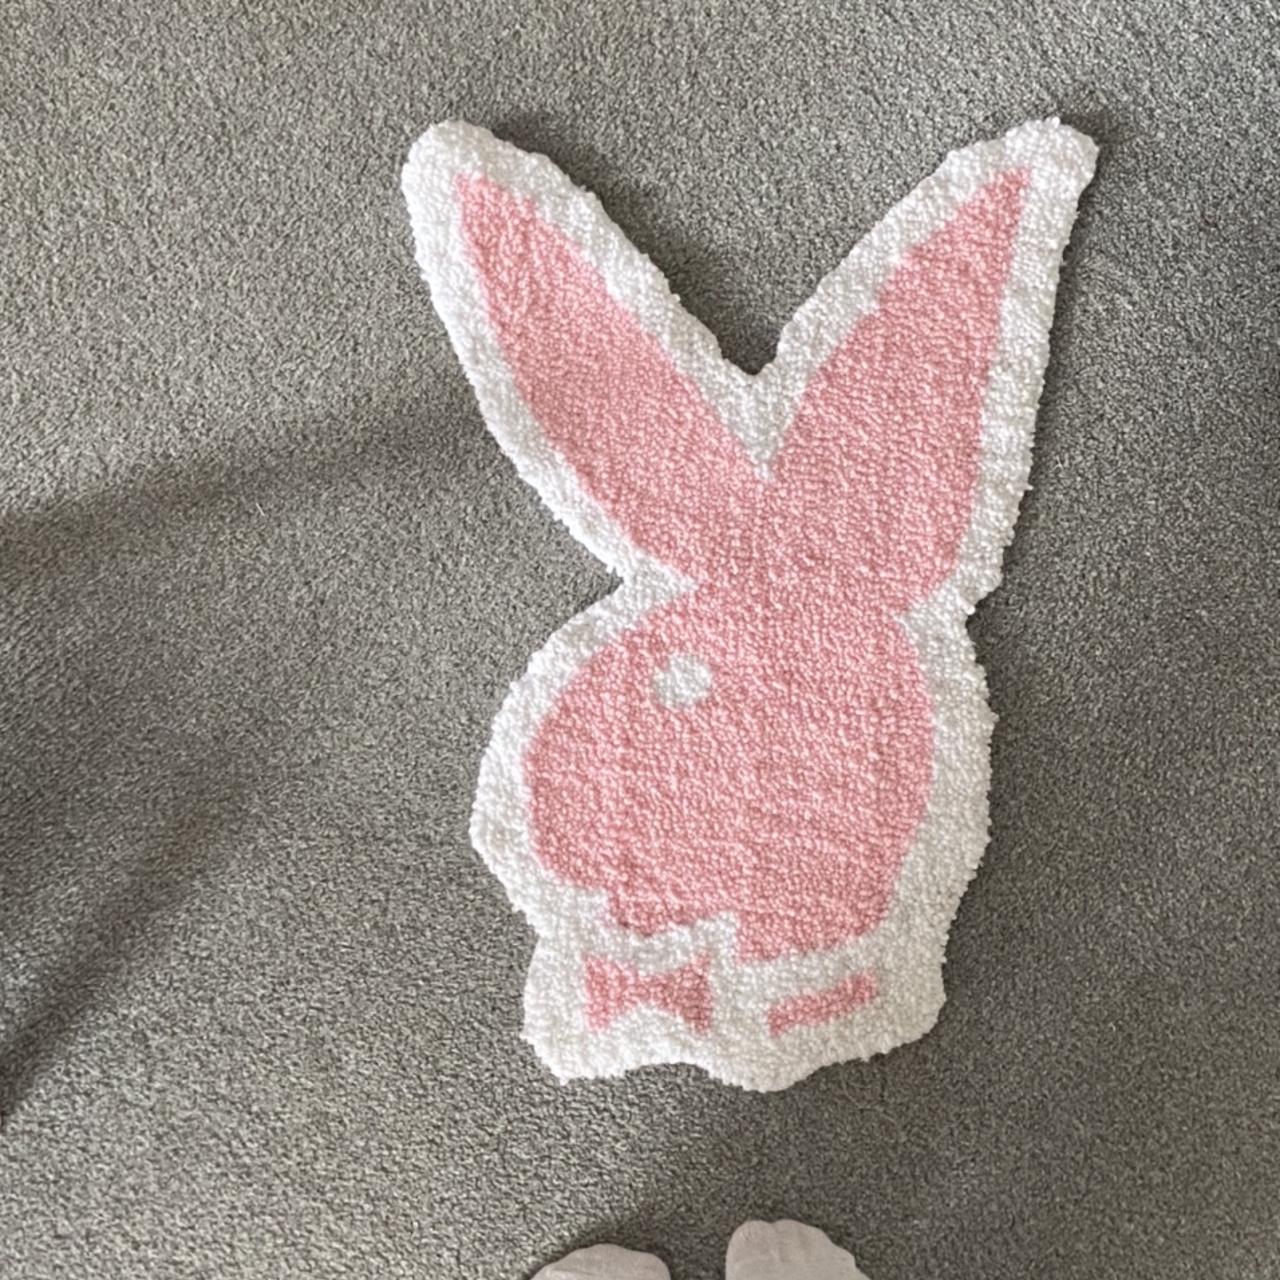 PLAYBOY BUNNY TUFTED RUG 🐰 This tufted rug has been - Depop